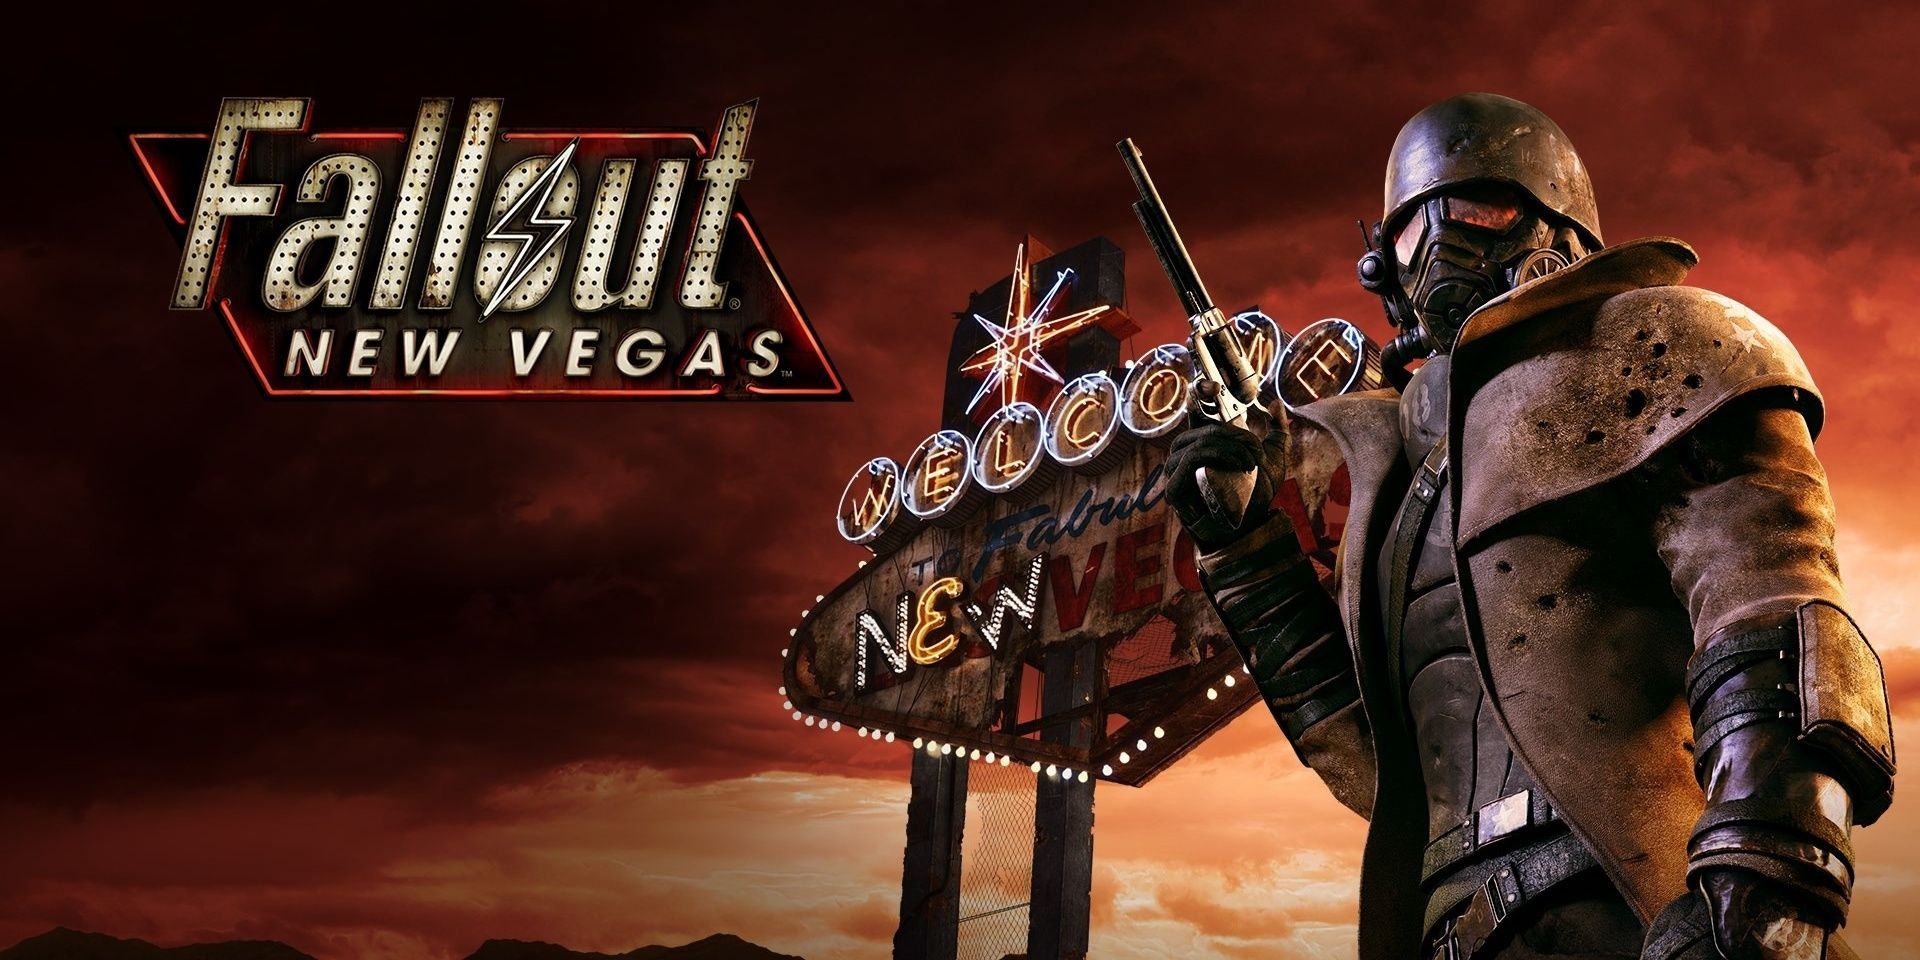 A desert ranger from Fallout: New Vegas poses with a pistol in hand, staring at the city logo behind him and the game logo to the left of the image.